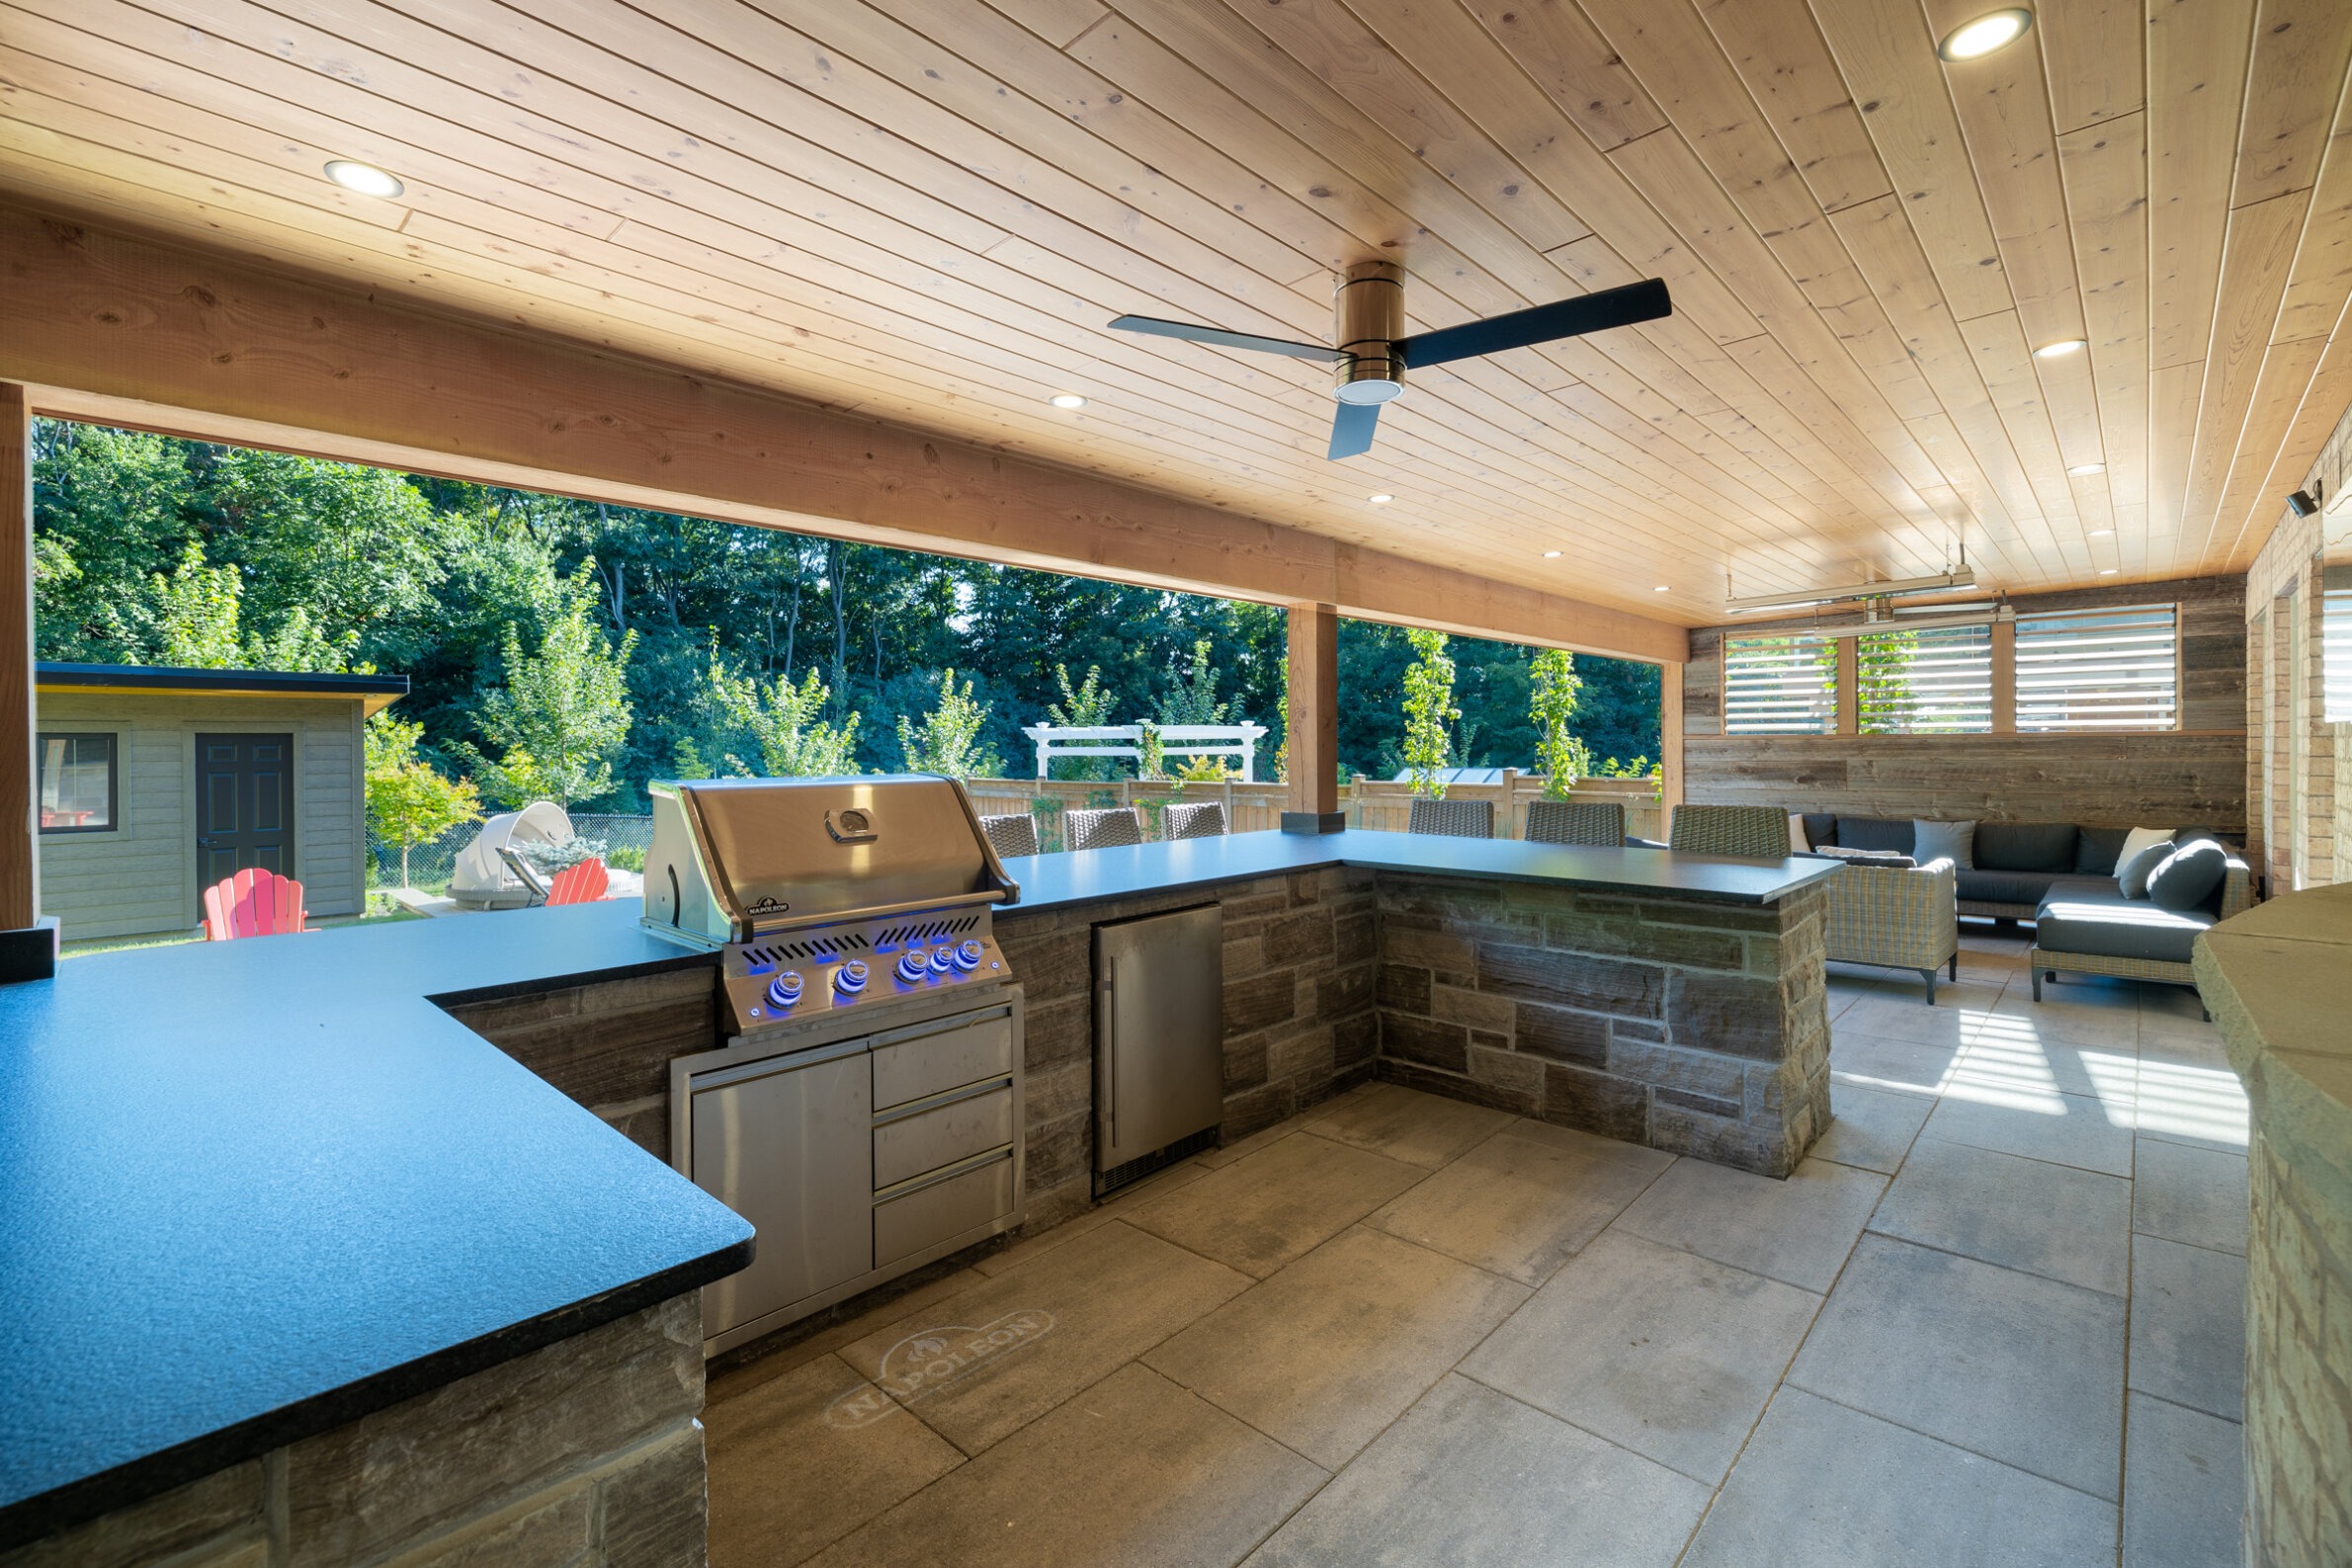 This image shows a spacious, covered outdoor kitchen area with modern appliances, a seating lounge, a wooden ceiling, and a view of a garden.